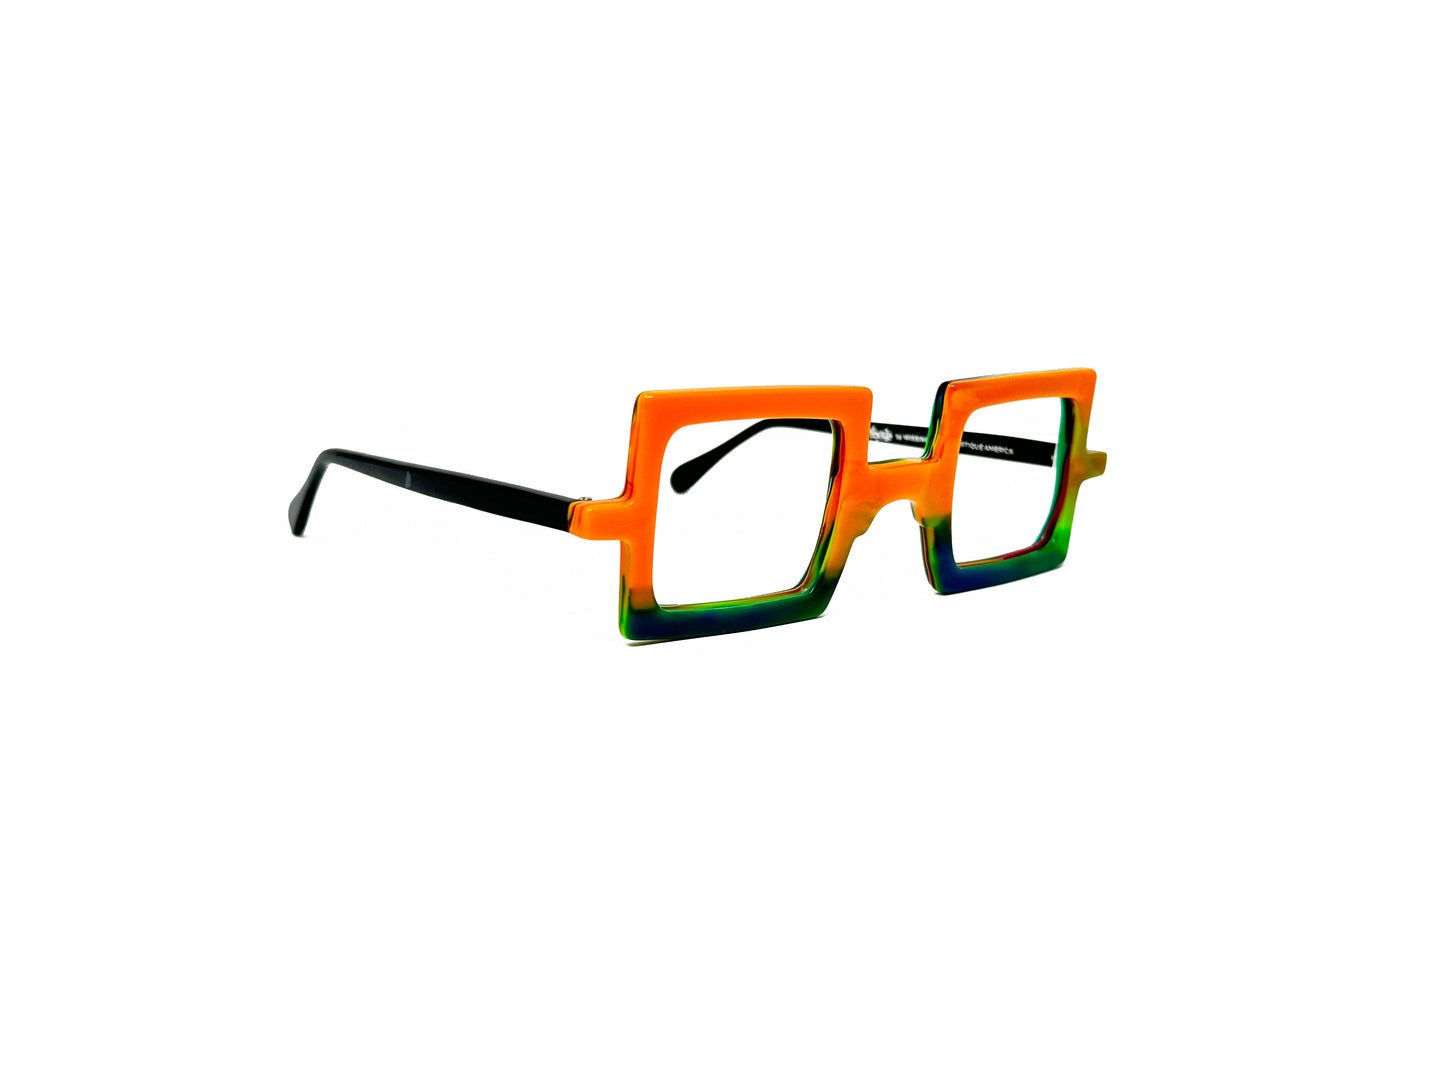 Viktlos square optical frame made from recycled acetate. Model: 3273. Color: 02261 - Orange and green. Side view.